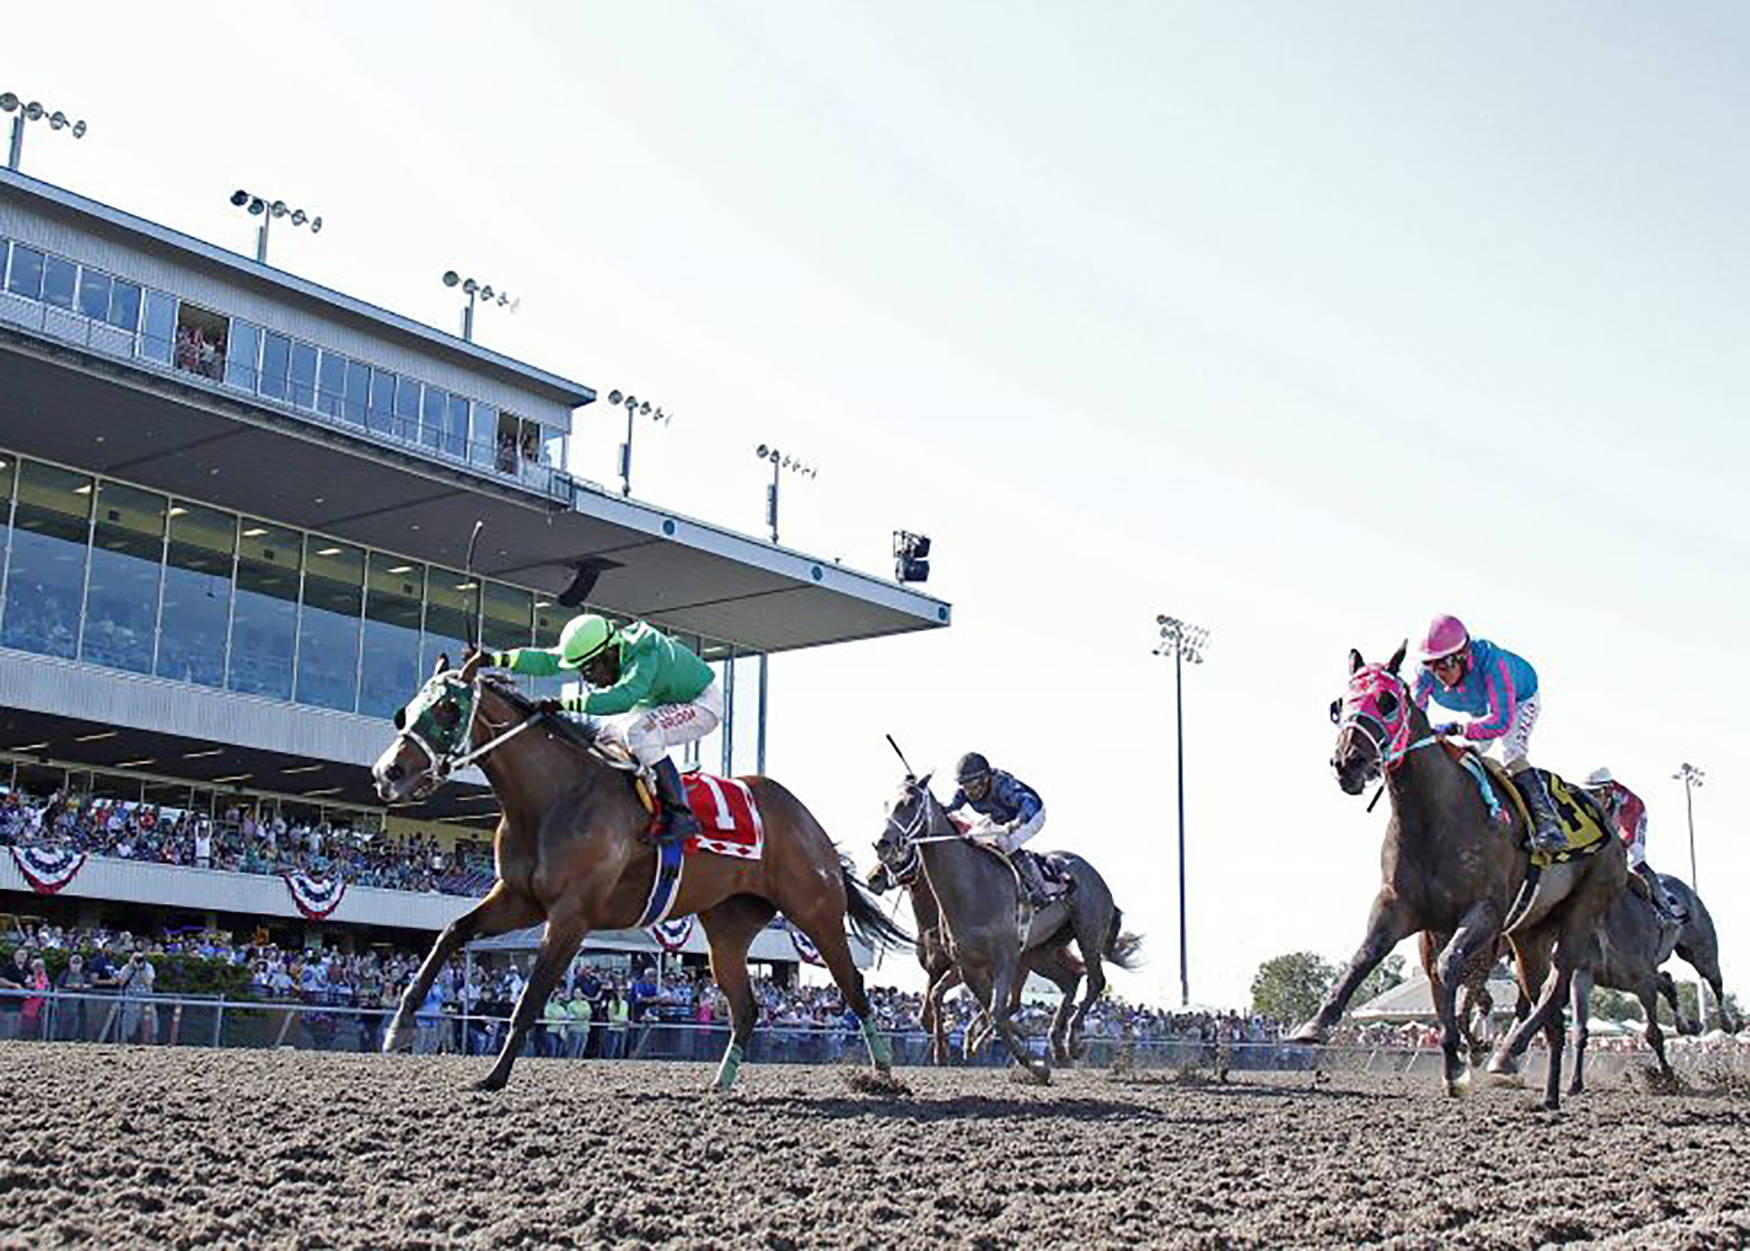 Risques’s Legacy, with Rocco Bowen up, left, edges Retreat Yourself and a Blazinbeauty for a one-length victory in the $50,000 Kent Stakes for 3-year-old fillies at Emerald Downs on Sunday. COURTESY PHOTO, Emerald Downs